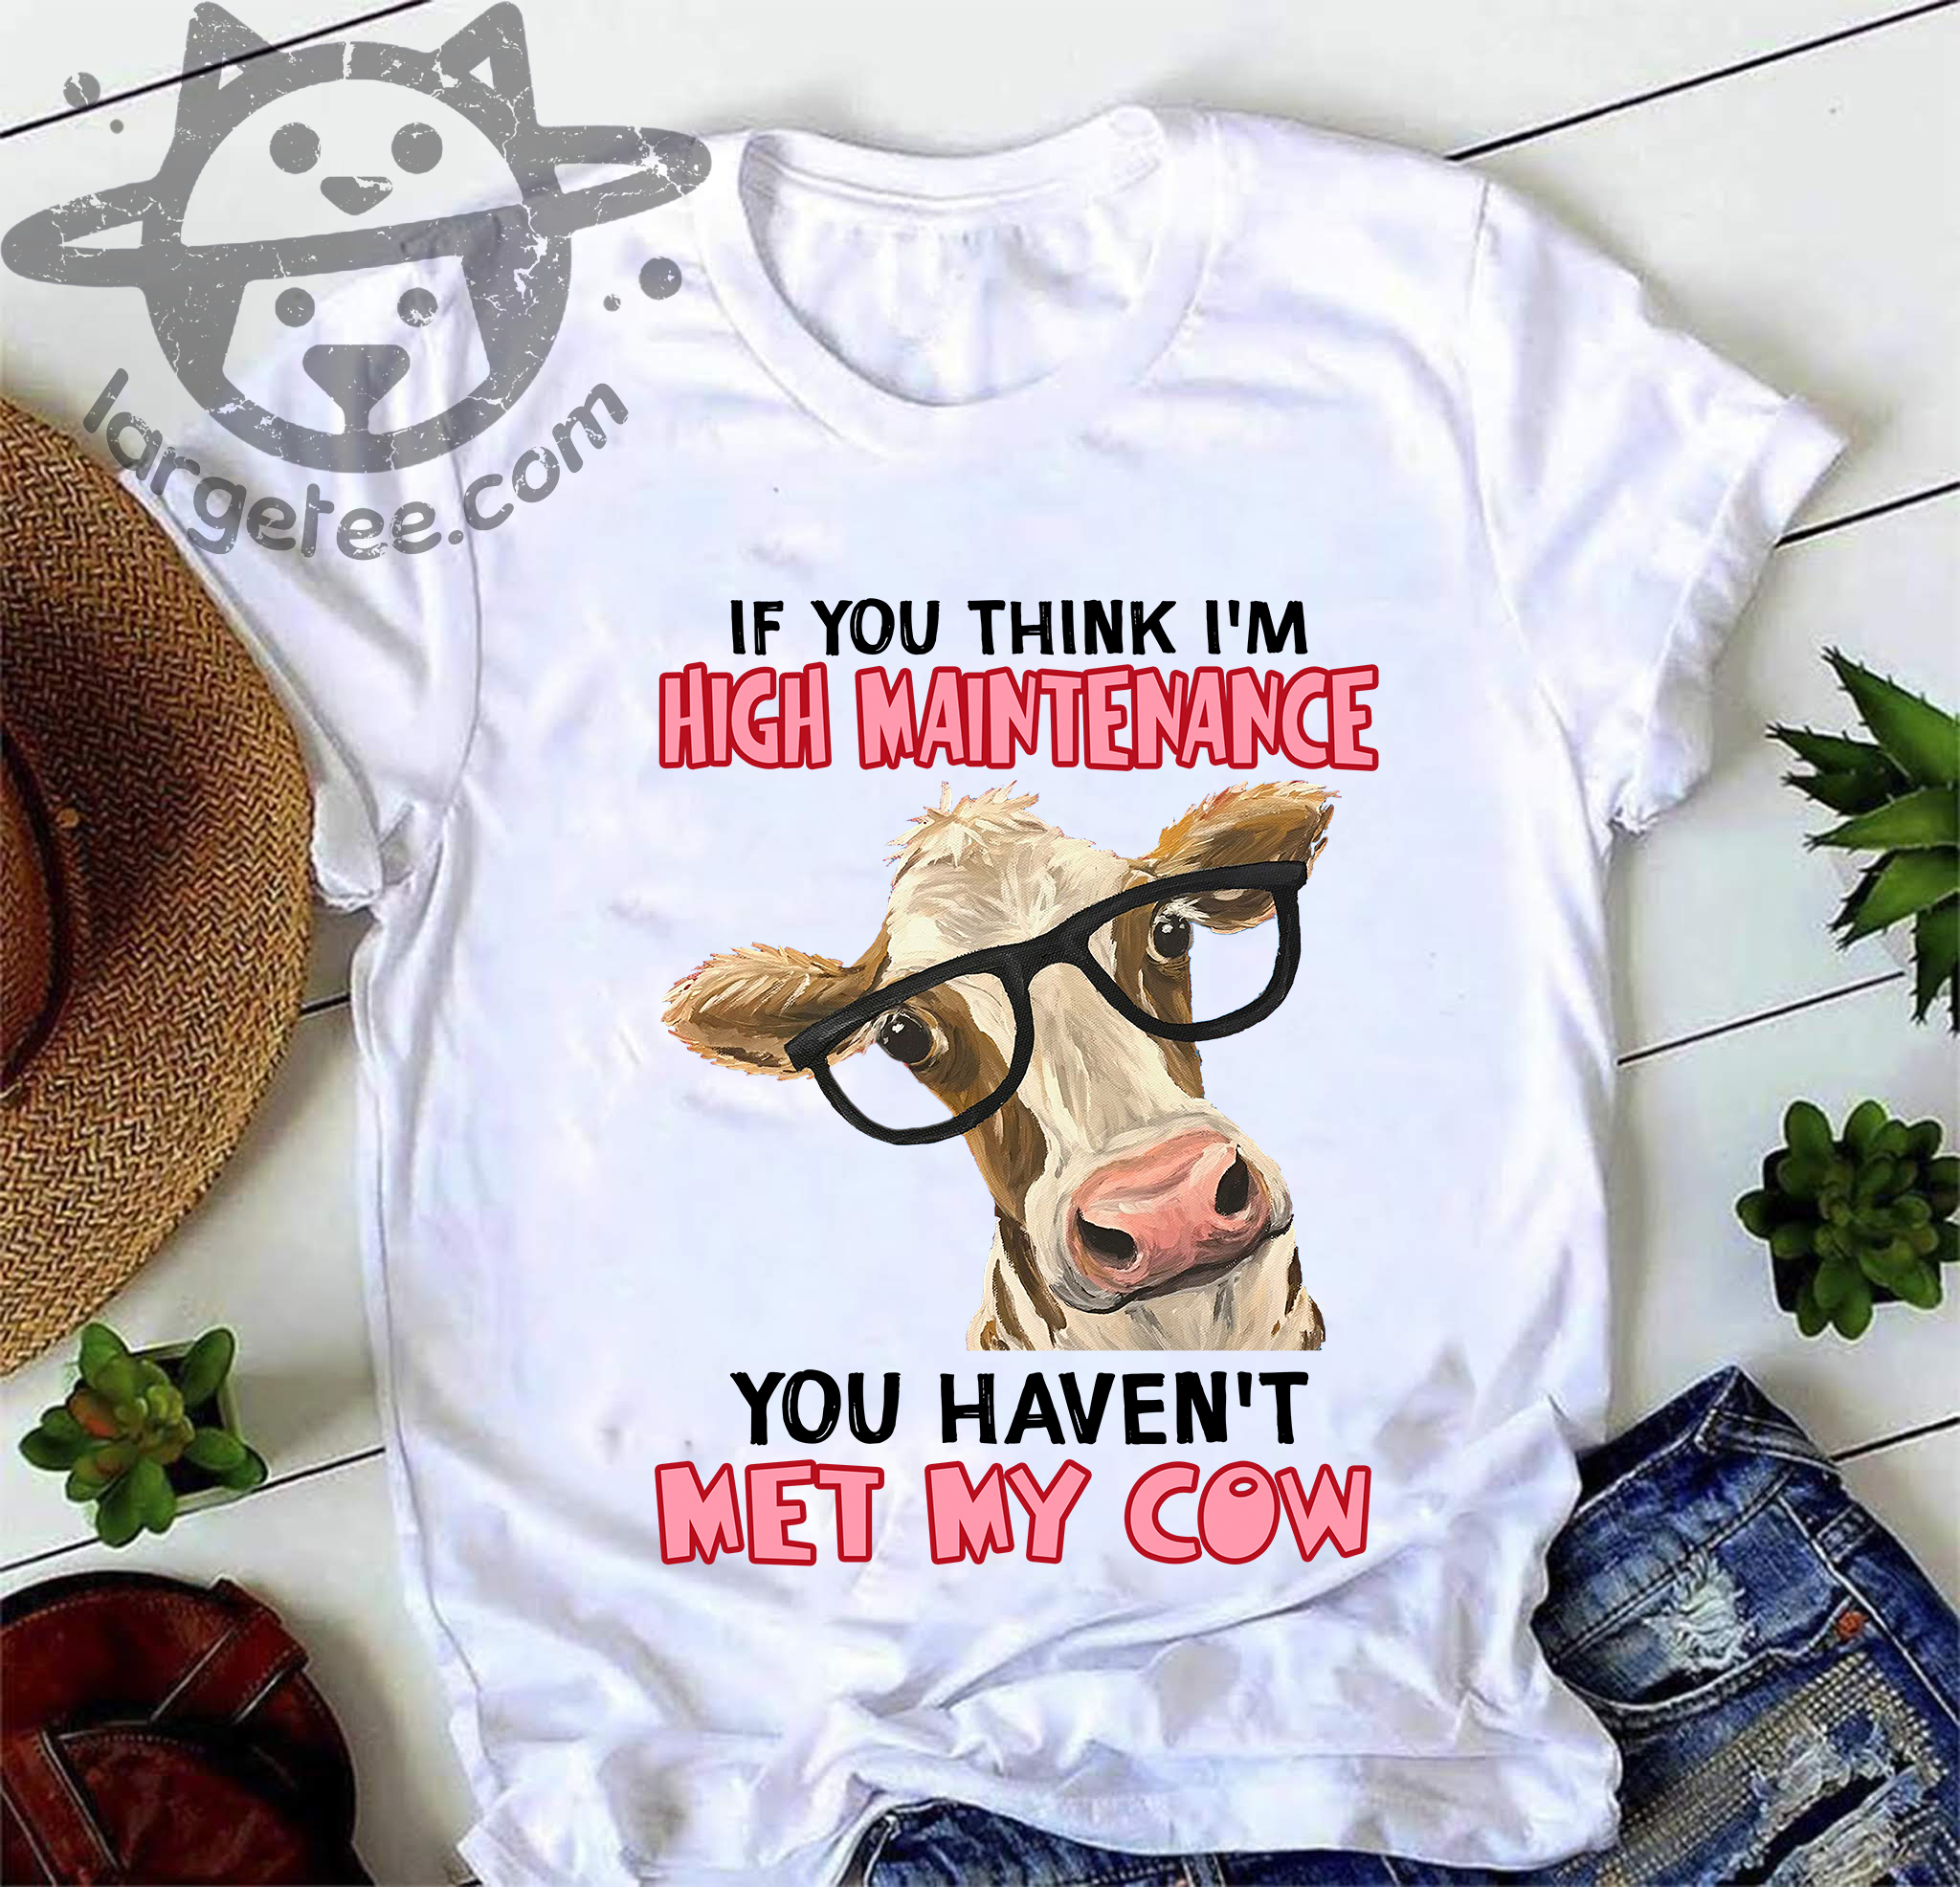 Cow With Glasses – If you think i’m high maintenance you haven’t met my cow